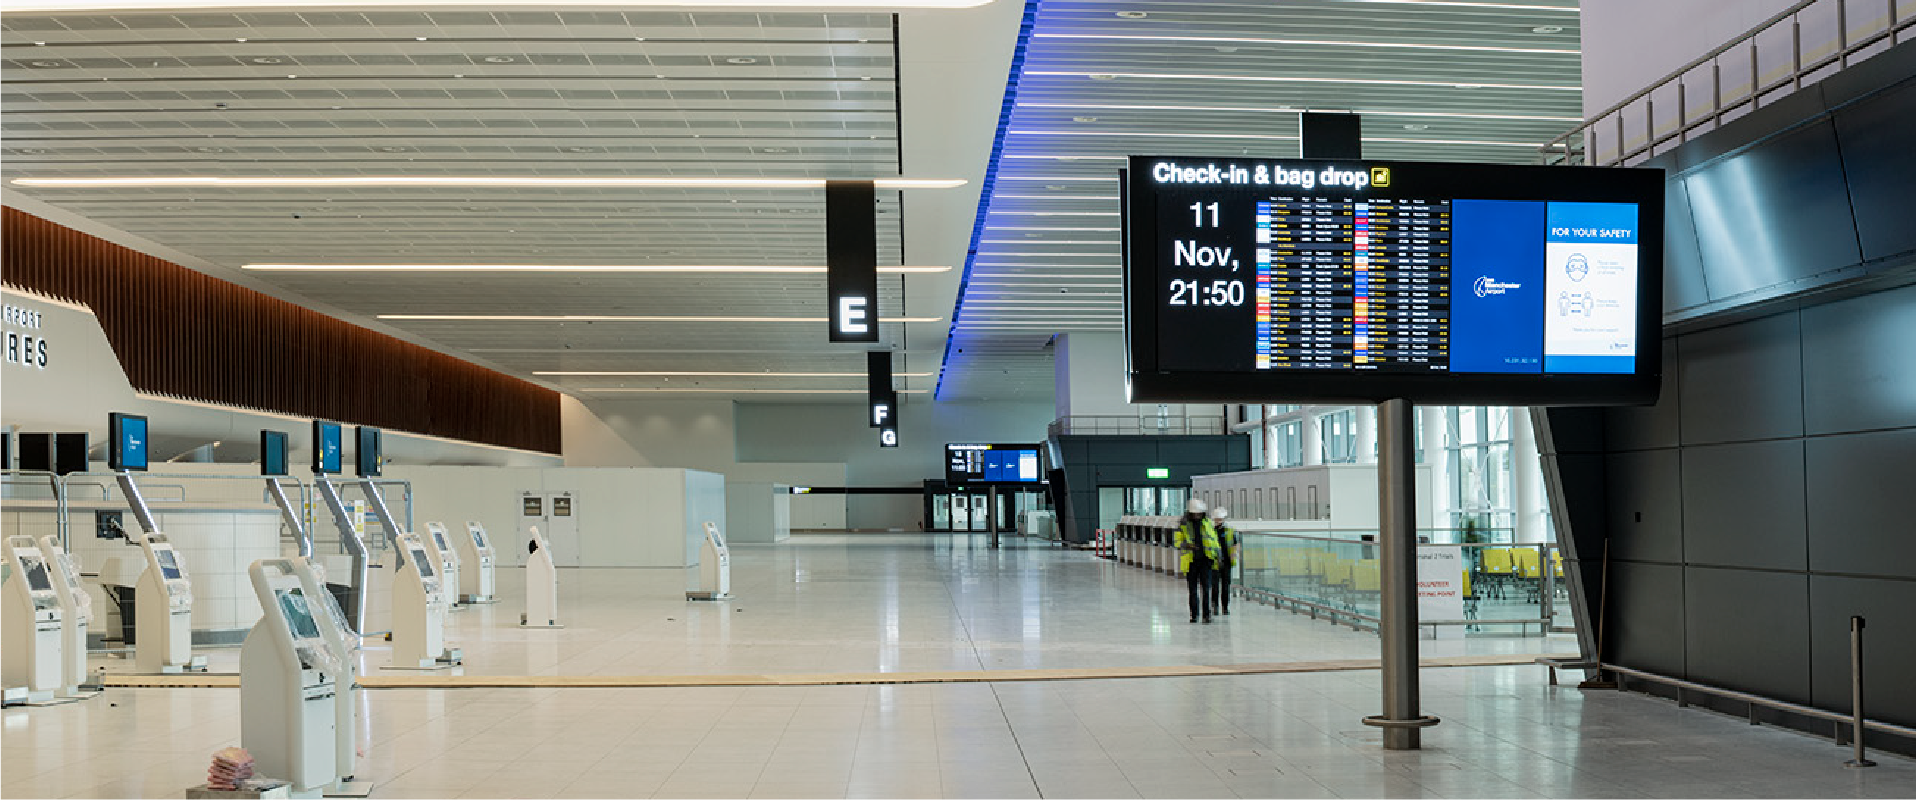 Case Study - Manchester Aiport Terminal 2 Transformation Project